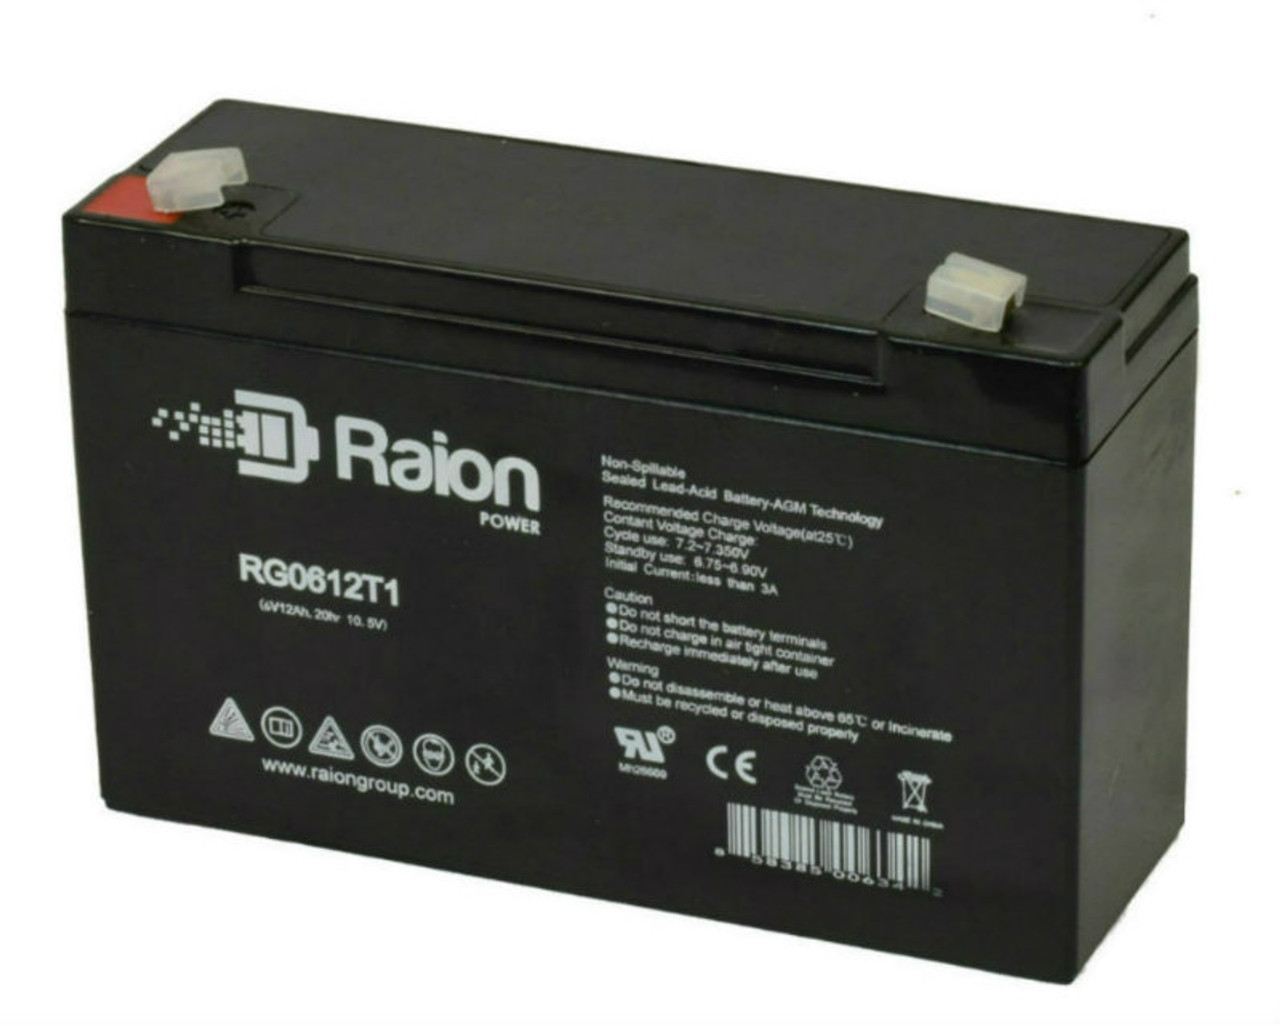 Raion Power RG06120T1 Replacement Emergency Light Battery for Siltron SPC19